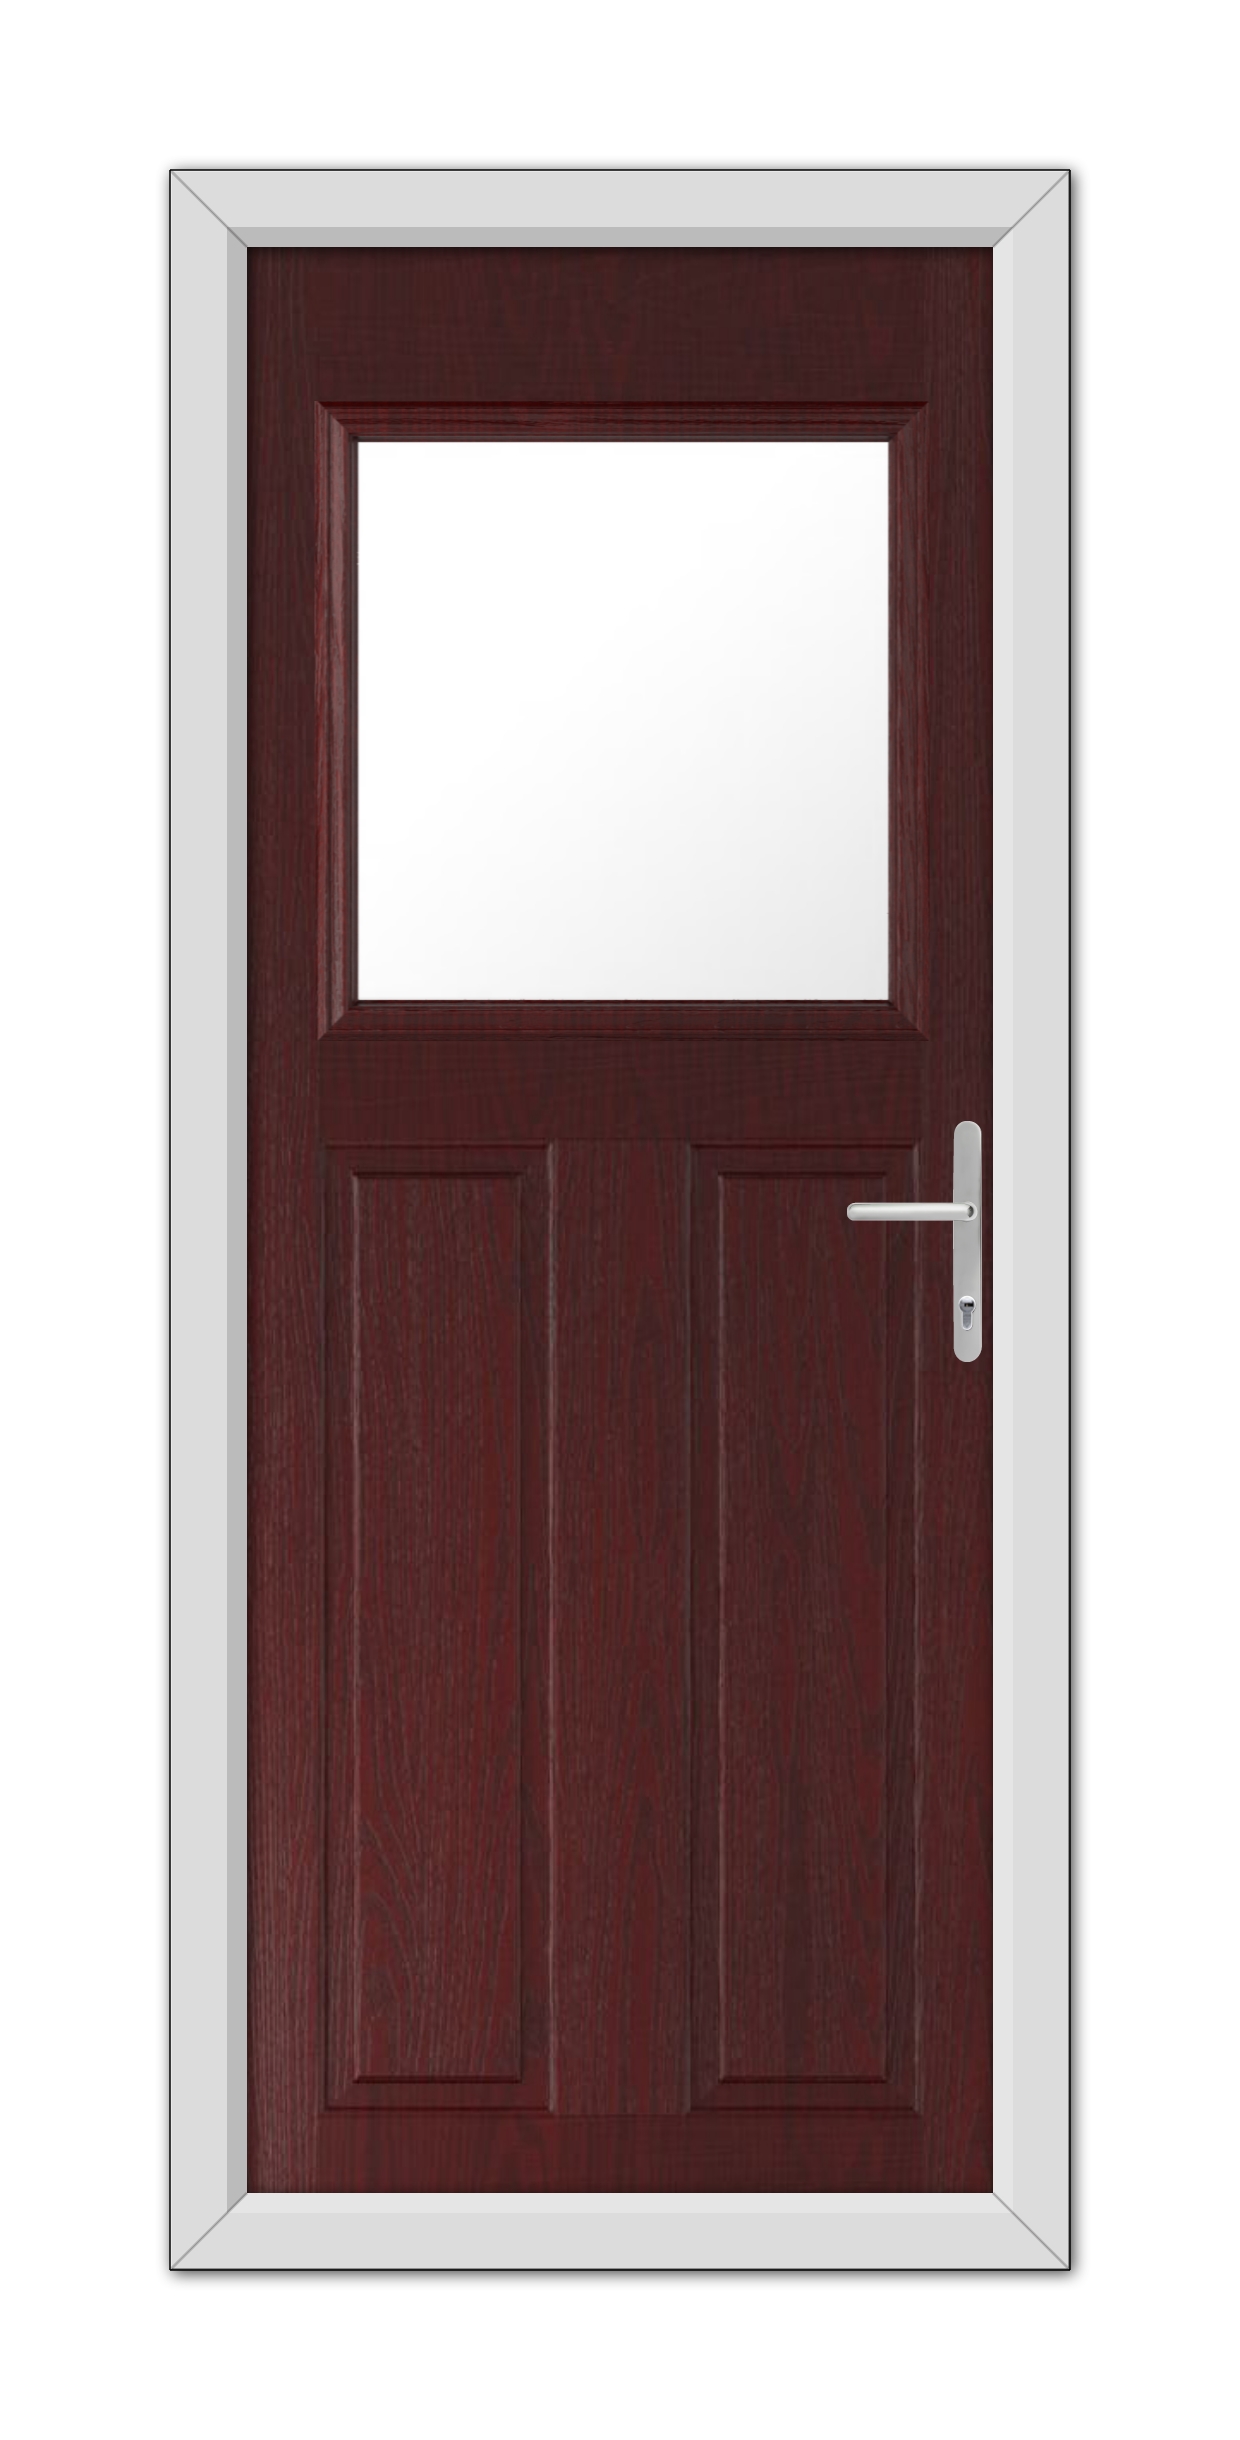 A Rosewood Axwell Composite Door 48mm Timber Core with a square window at the top, equipped with a modern handle, set within a white frame.